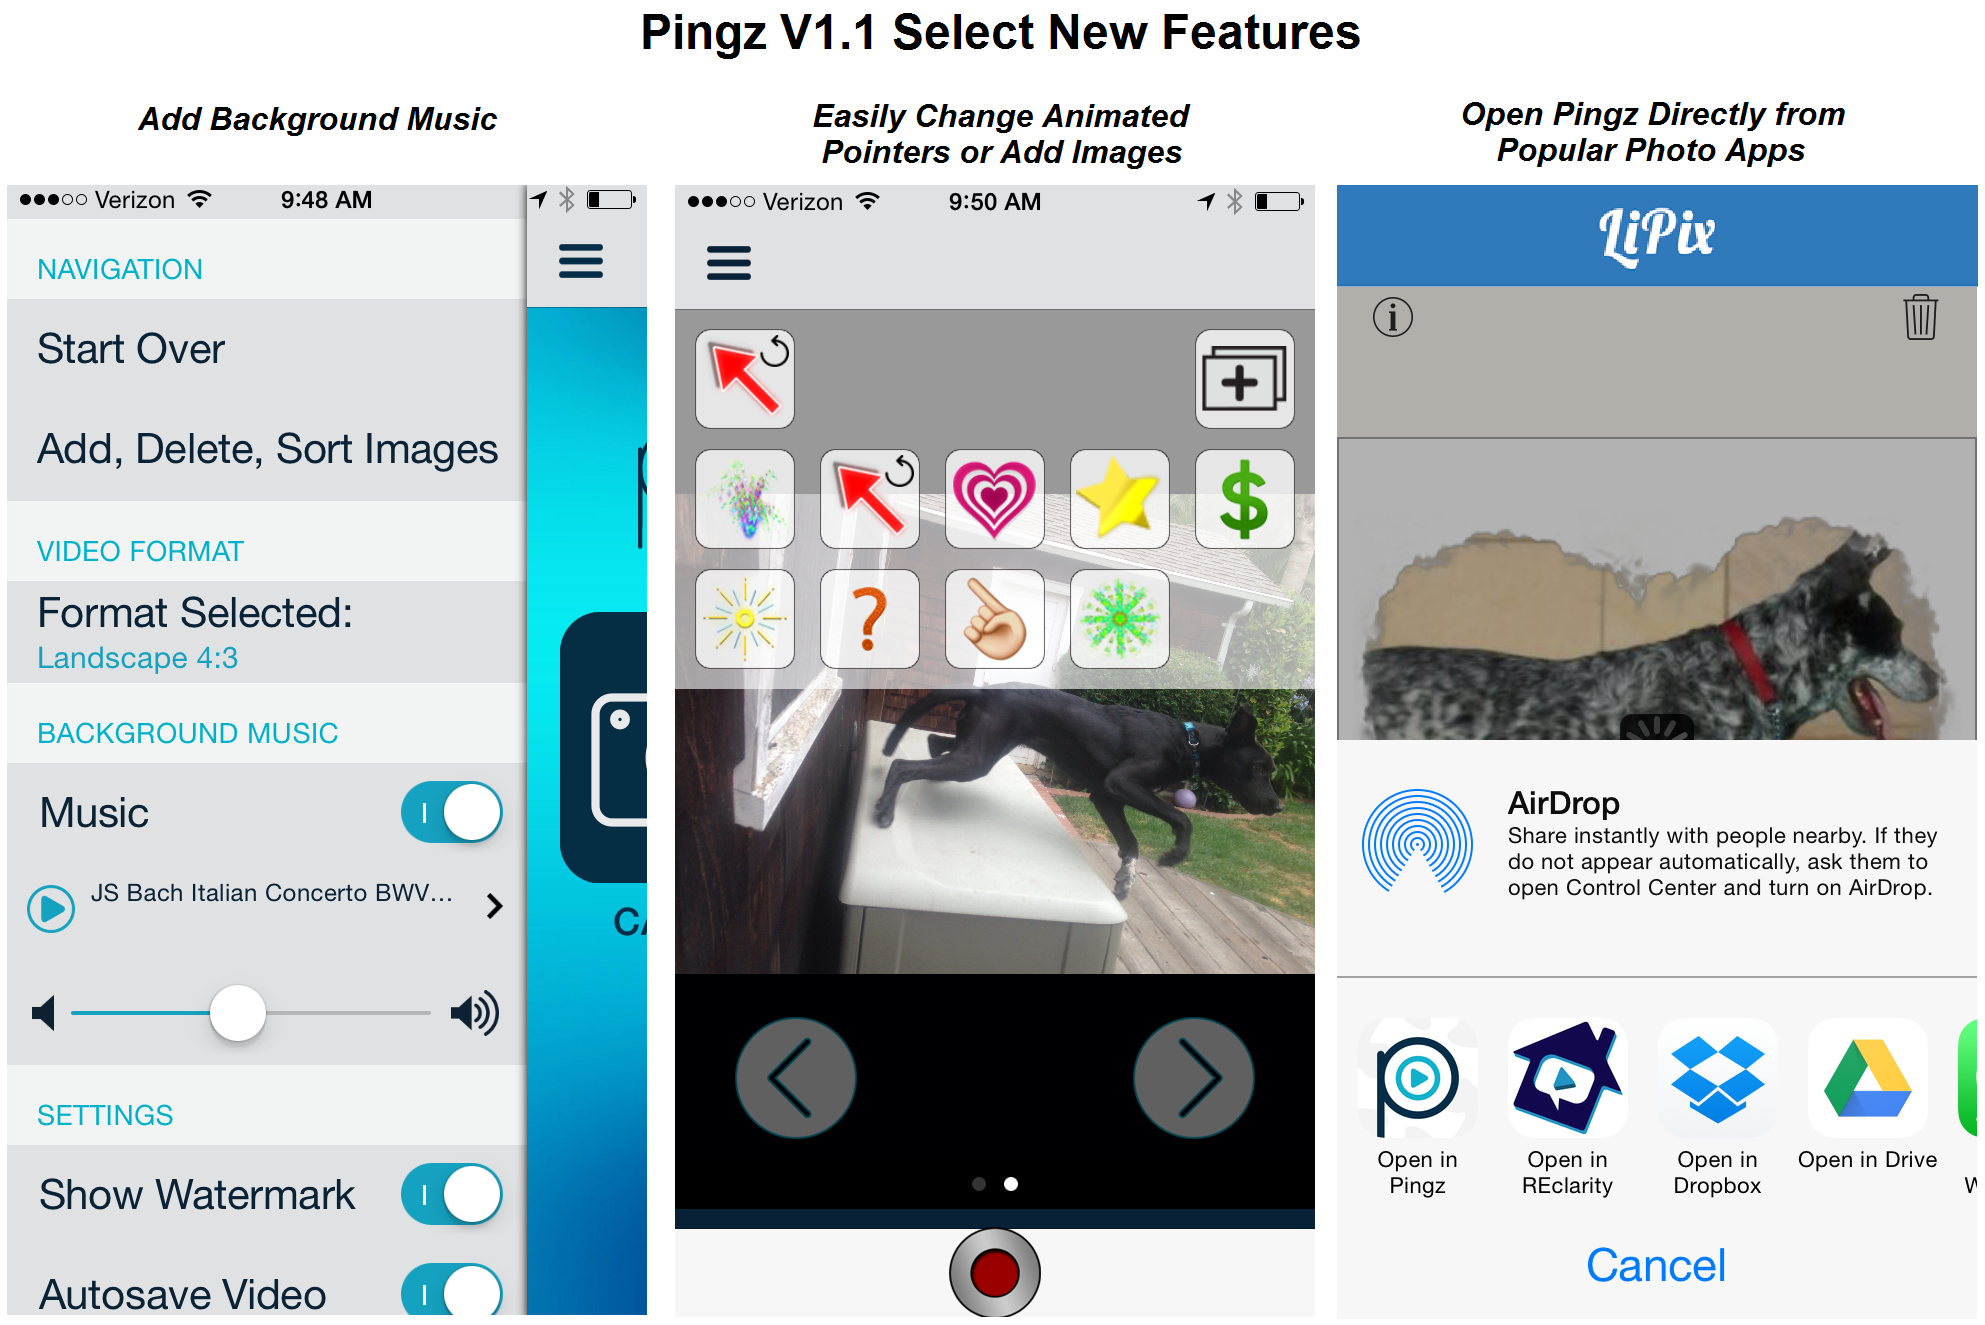 Pingz V1.1 Select New Features